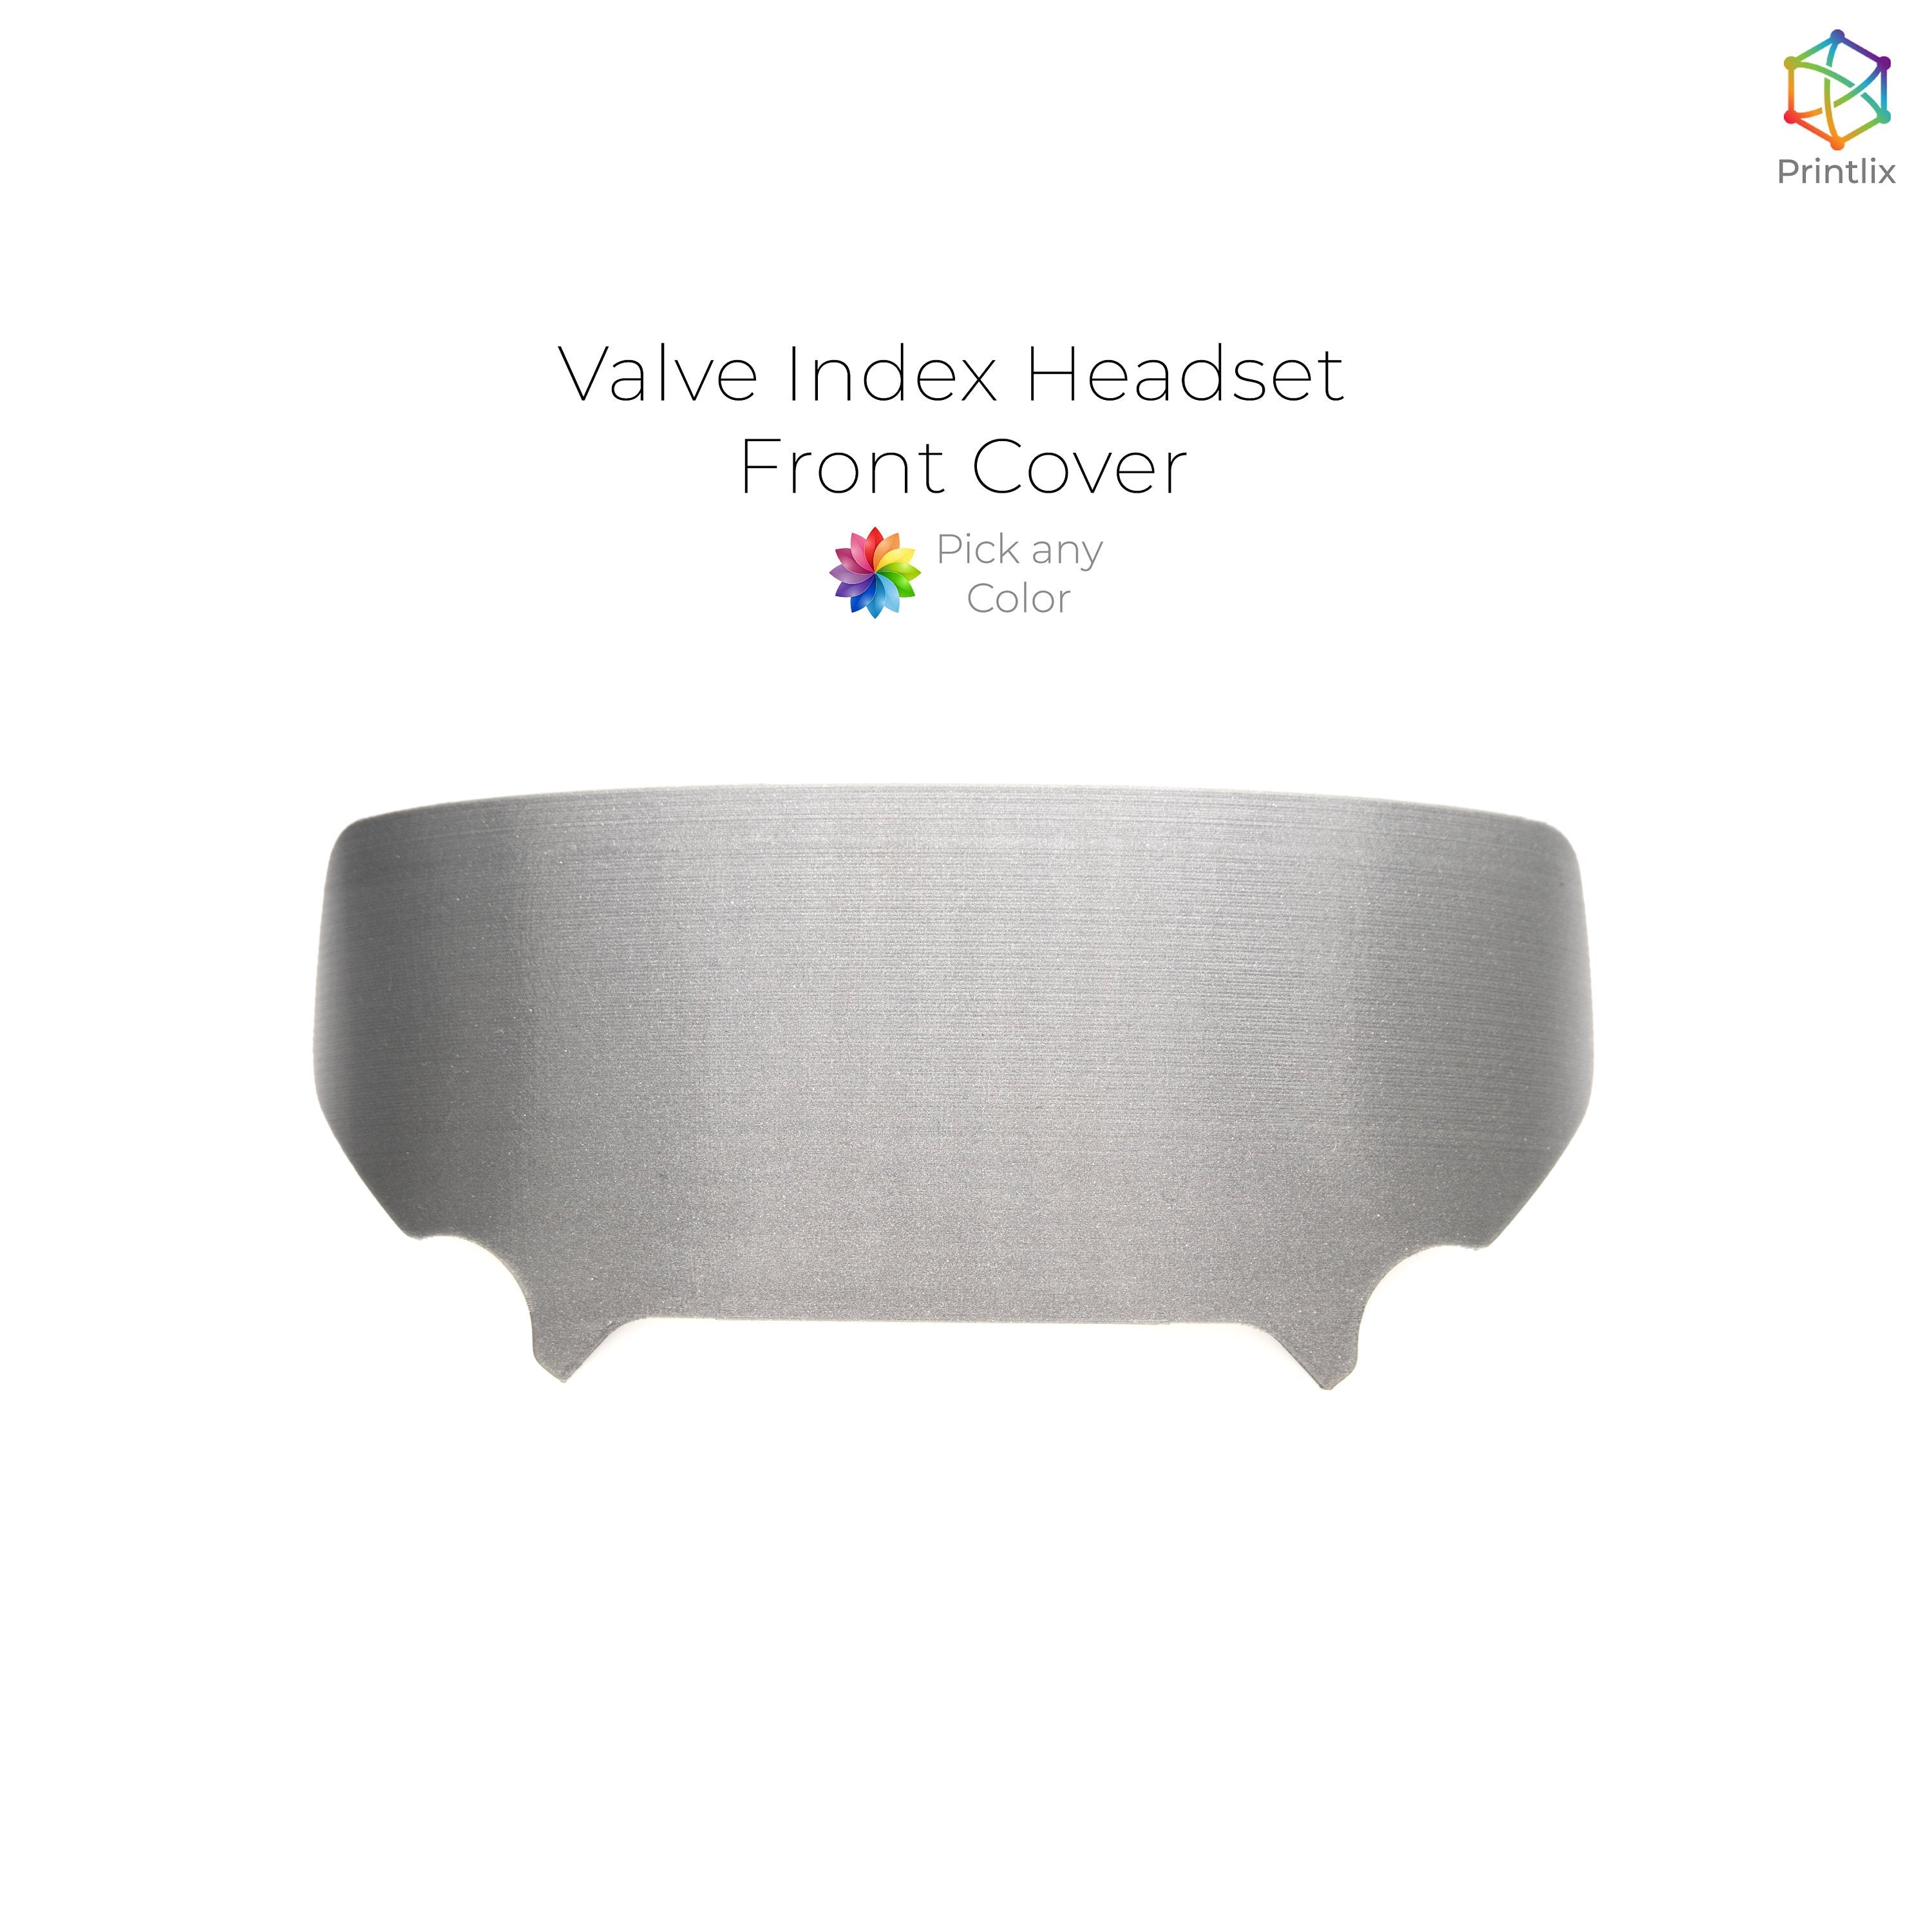 Valve Index Headset Front Cover